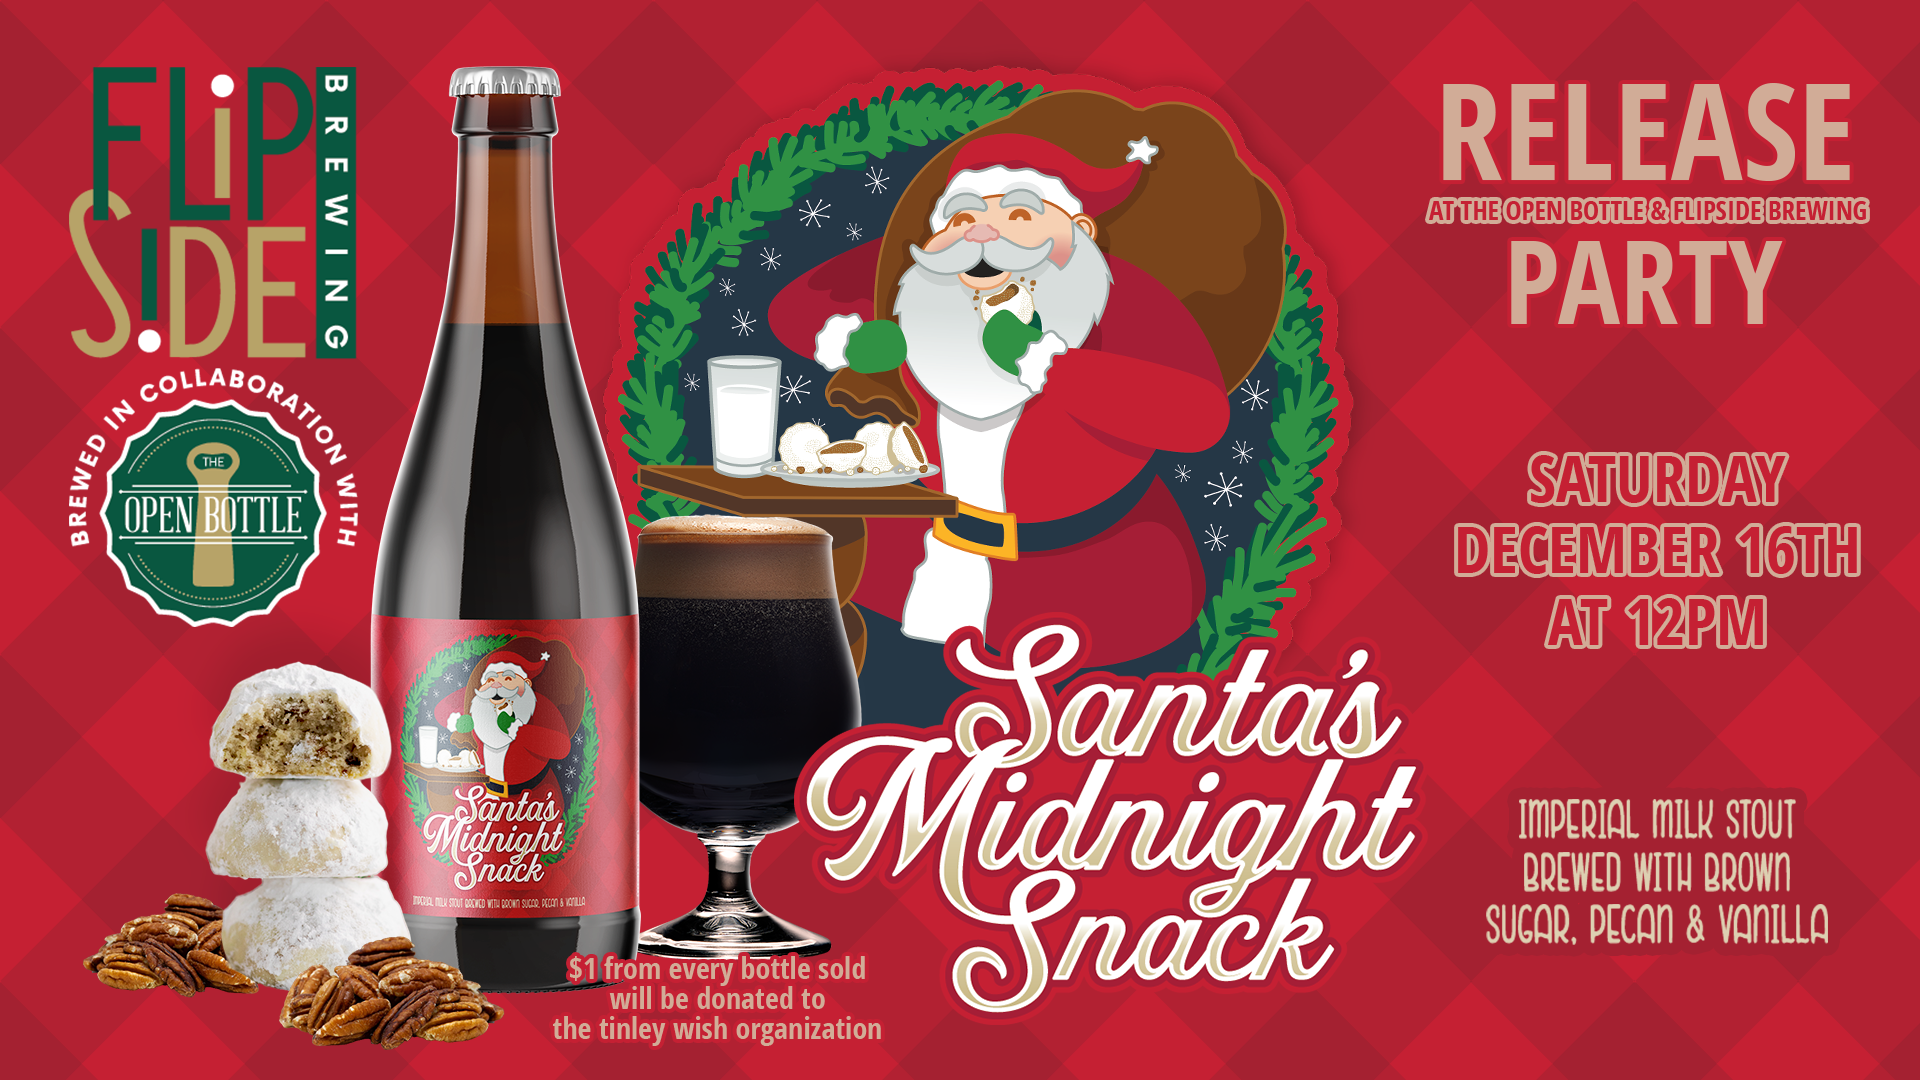 Event: Flipside & The Open Bottle ‘Santa’s Midnight’ Snack Release Party in Lockport